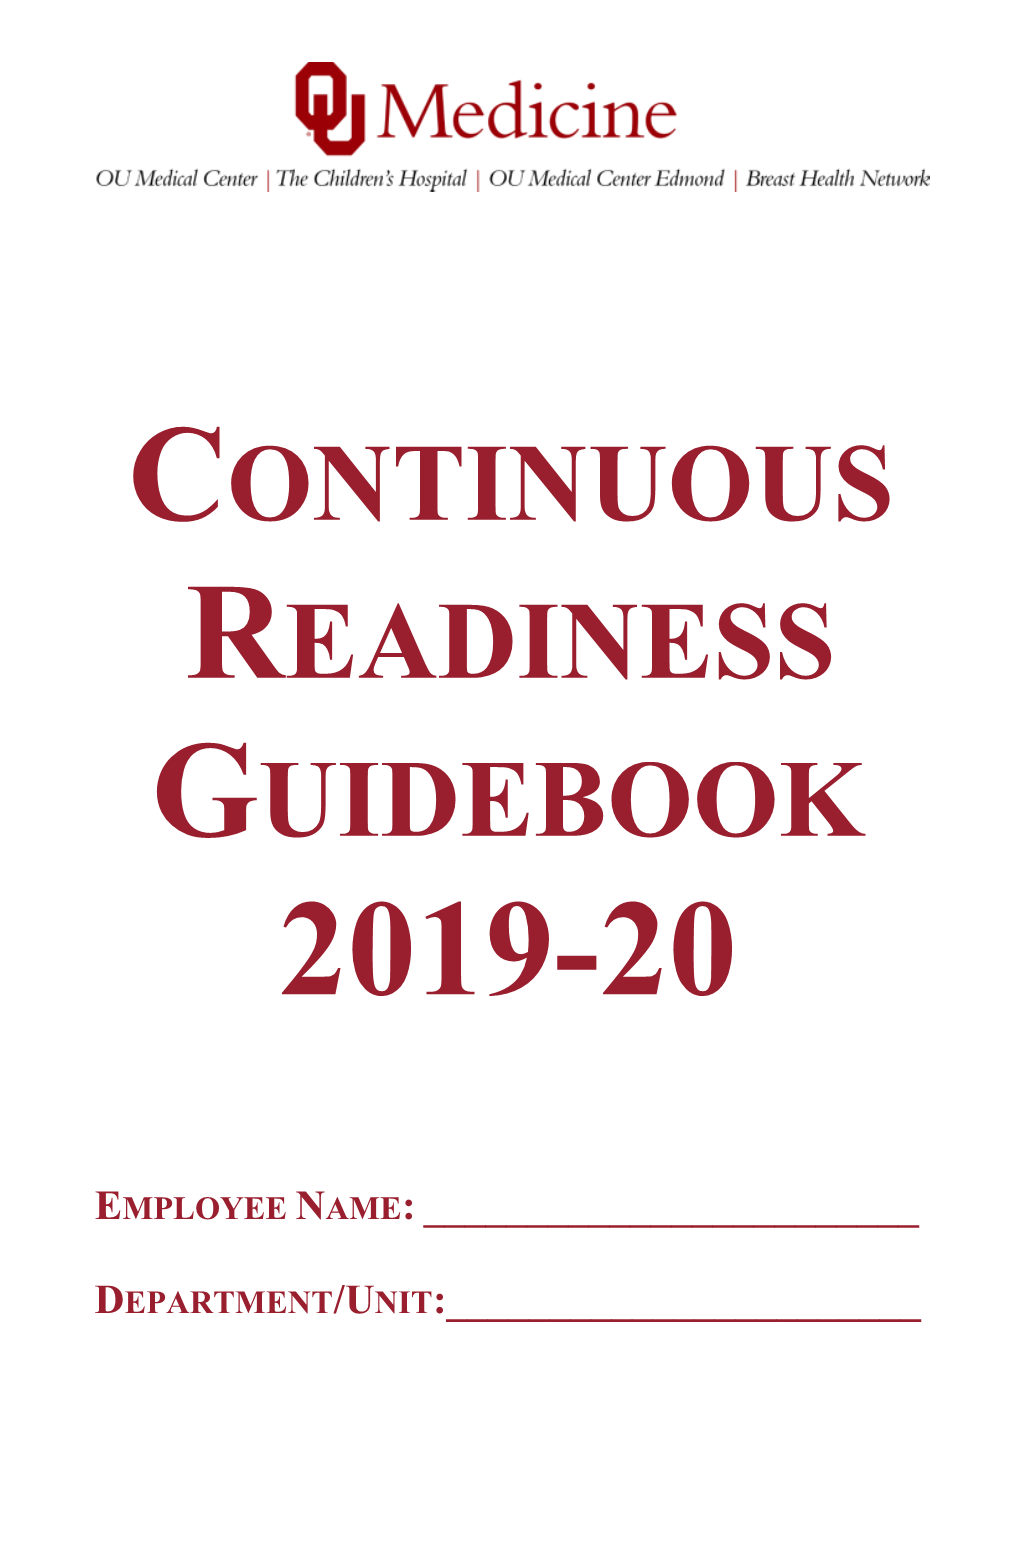 Continuous Readiness Guidebook 2019-20